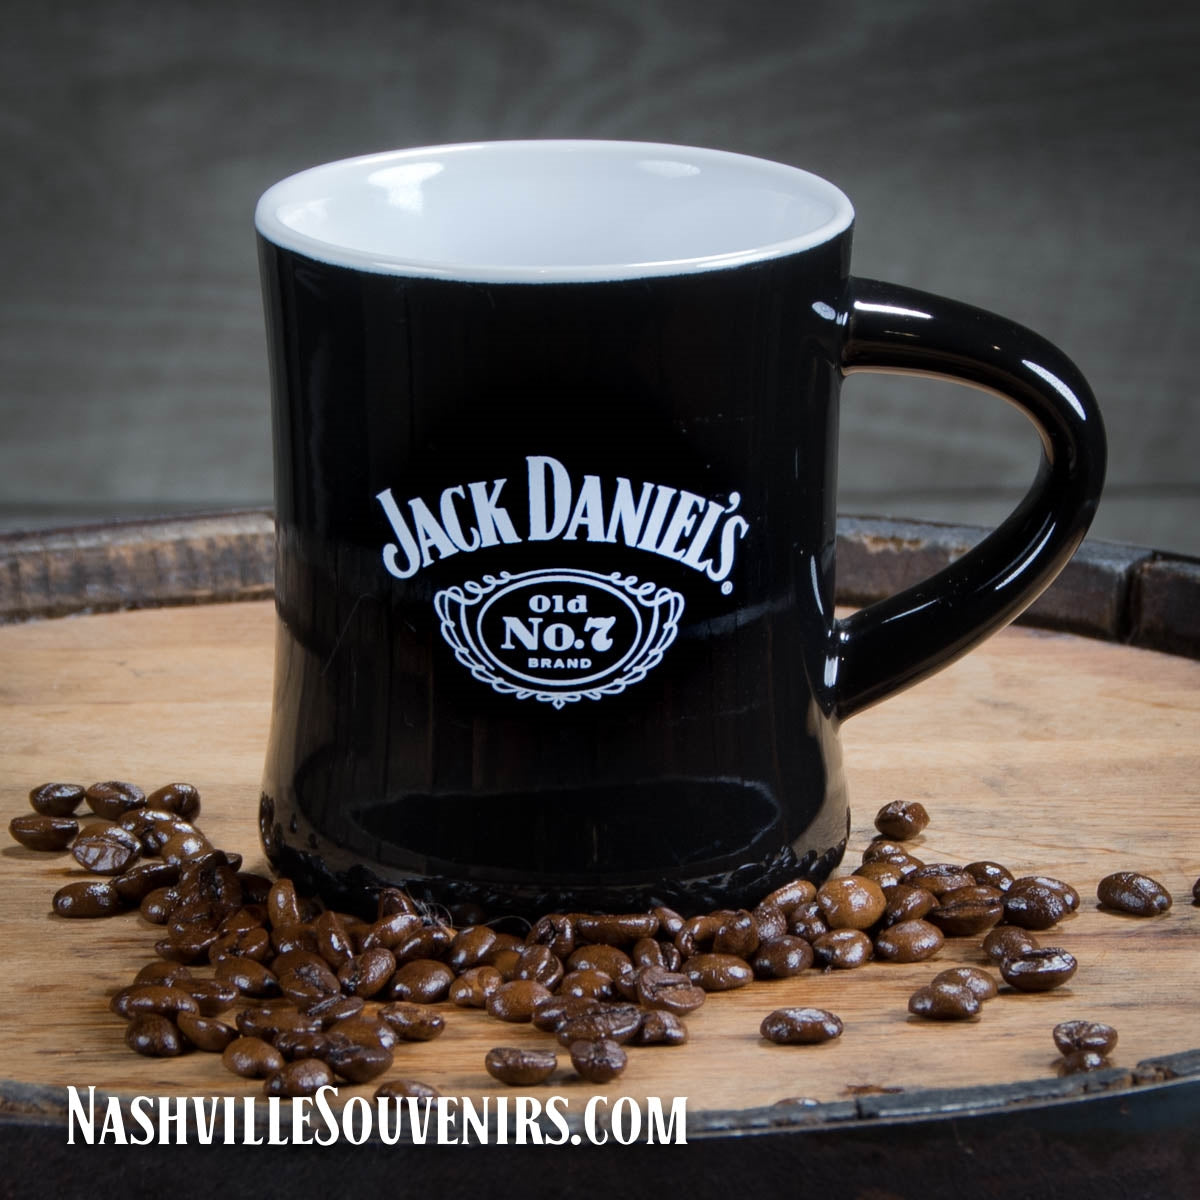 Sip your morning brew in this new (yet classic looking) Jack Daniel's Diner Mug. Get it today with FREE SHIPPING on all US orders over $75! What better pairing for your Jack Daniel's Coffee than this classic mug?